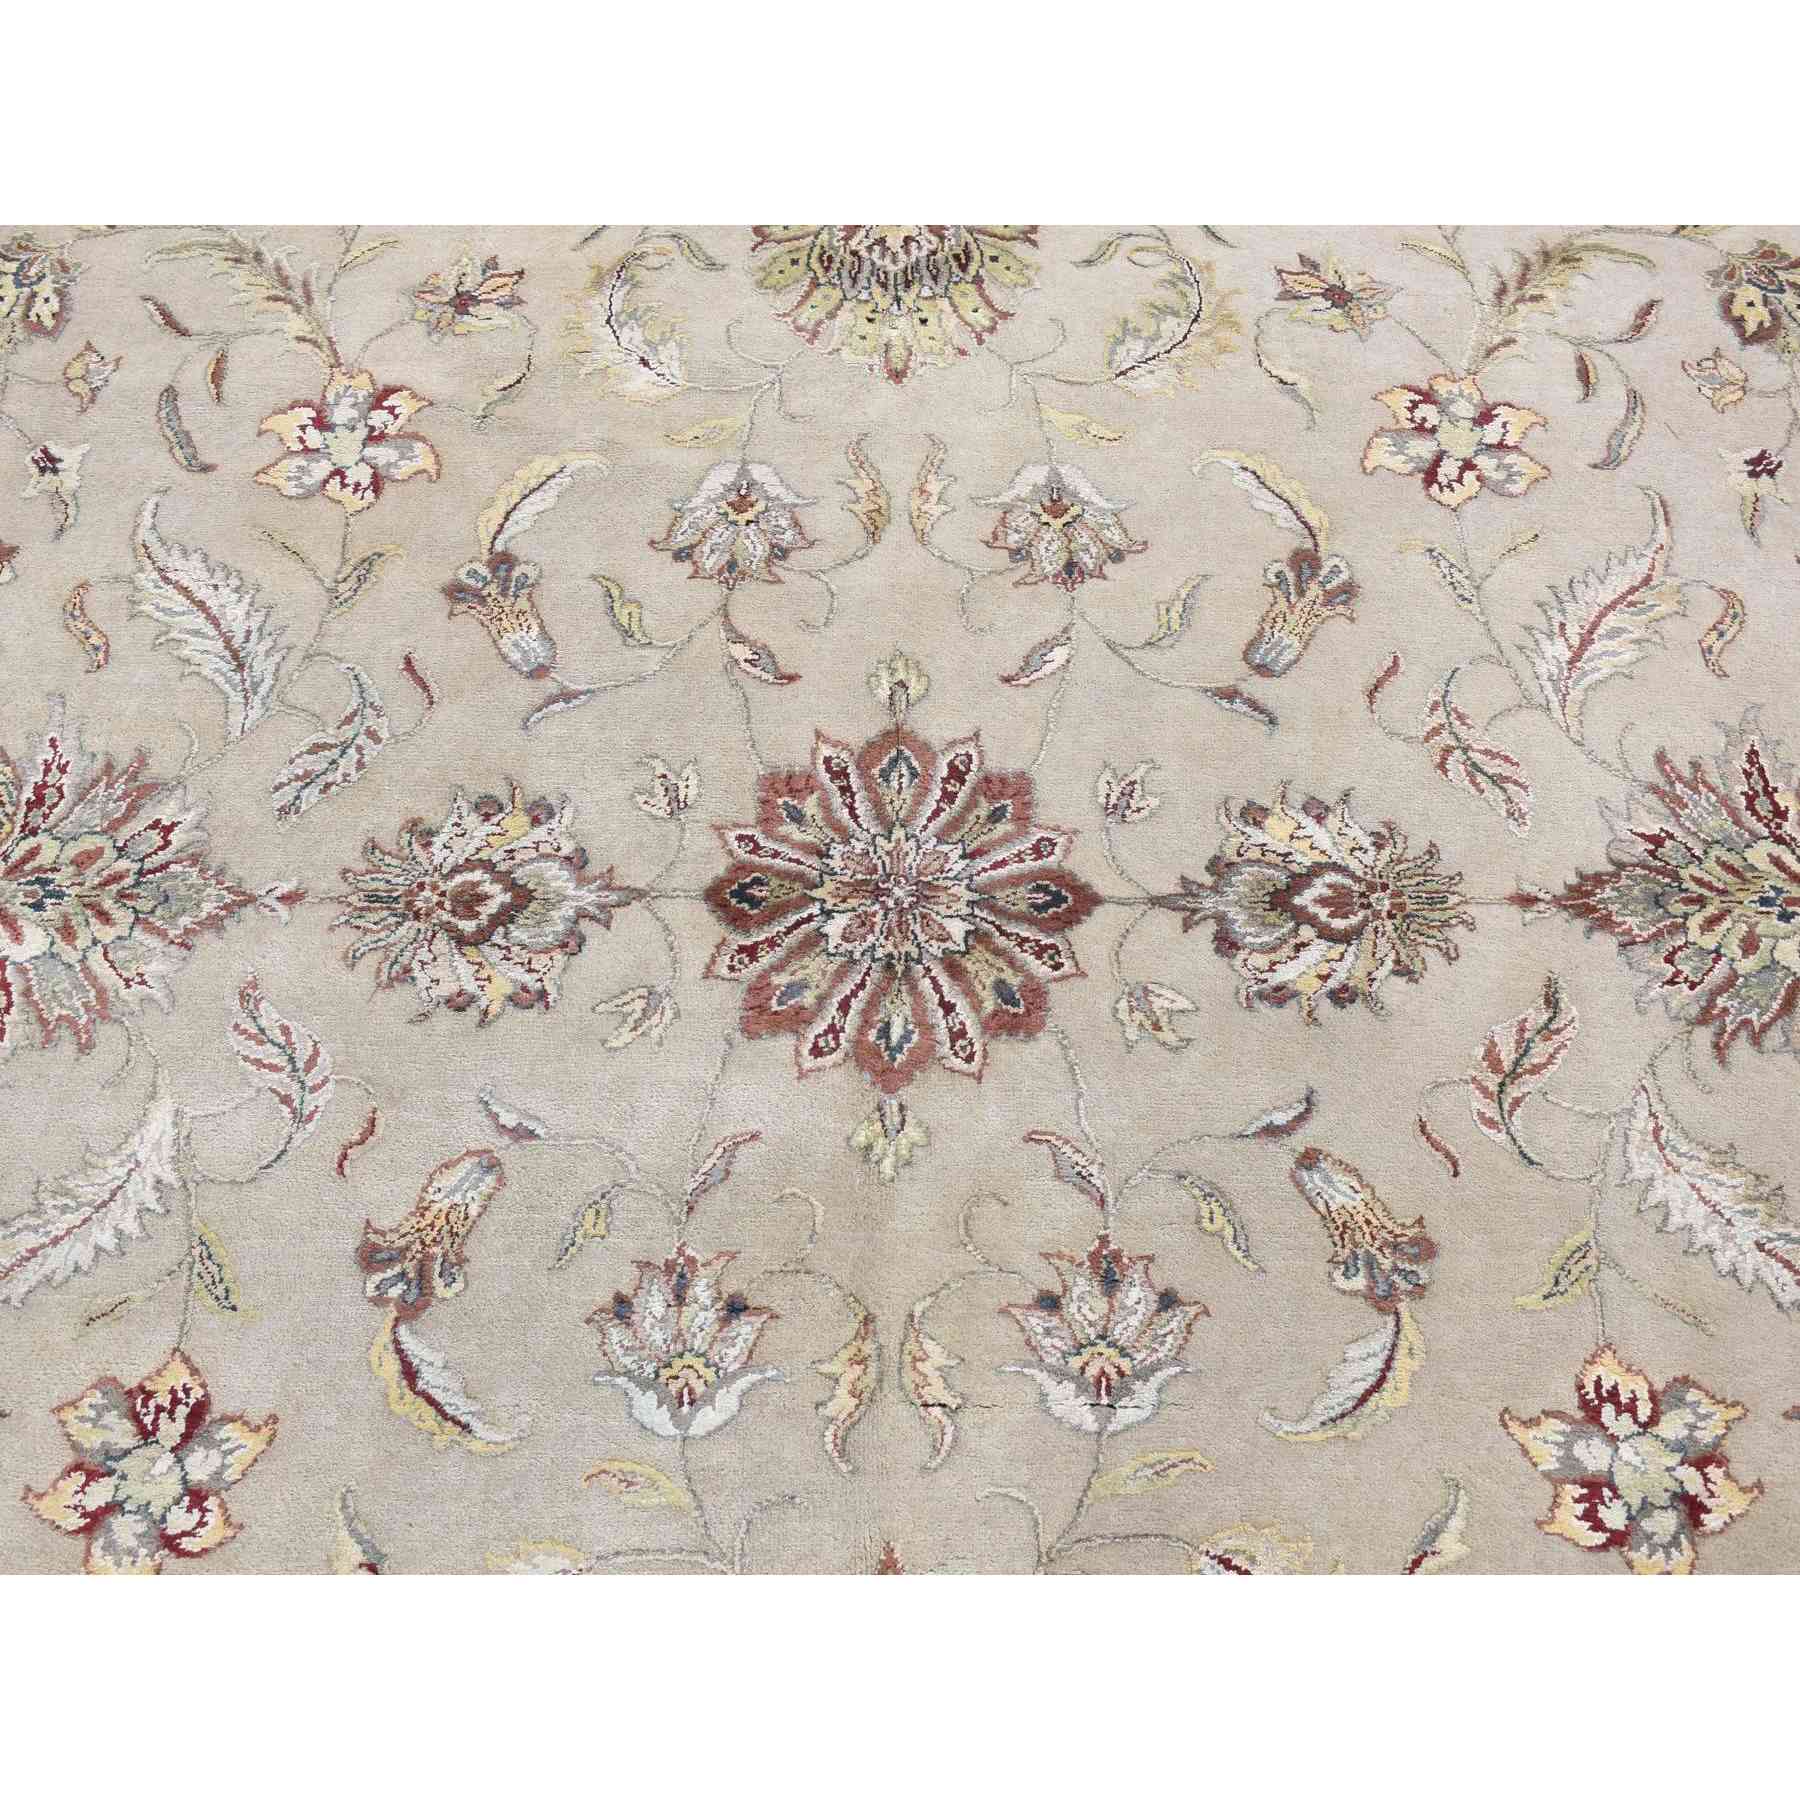 Rajasthan-Hand-Knotted-Rug-438330